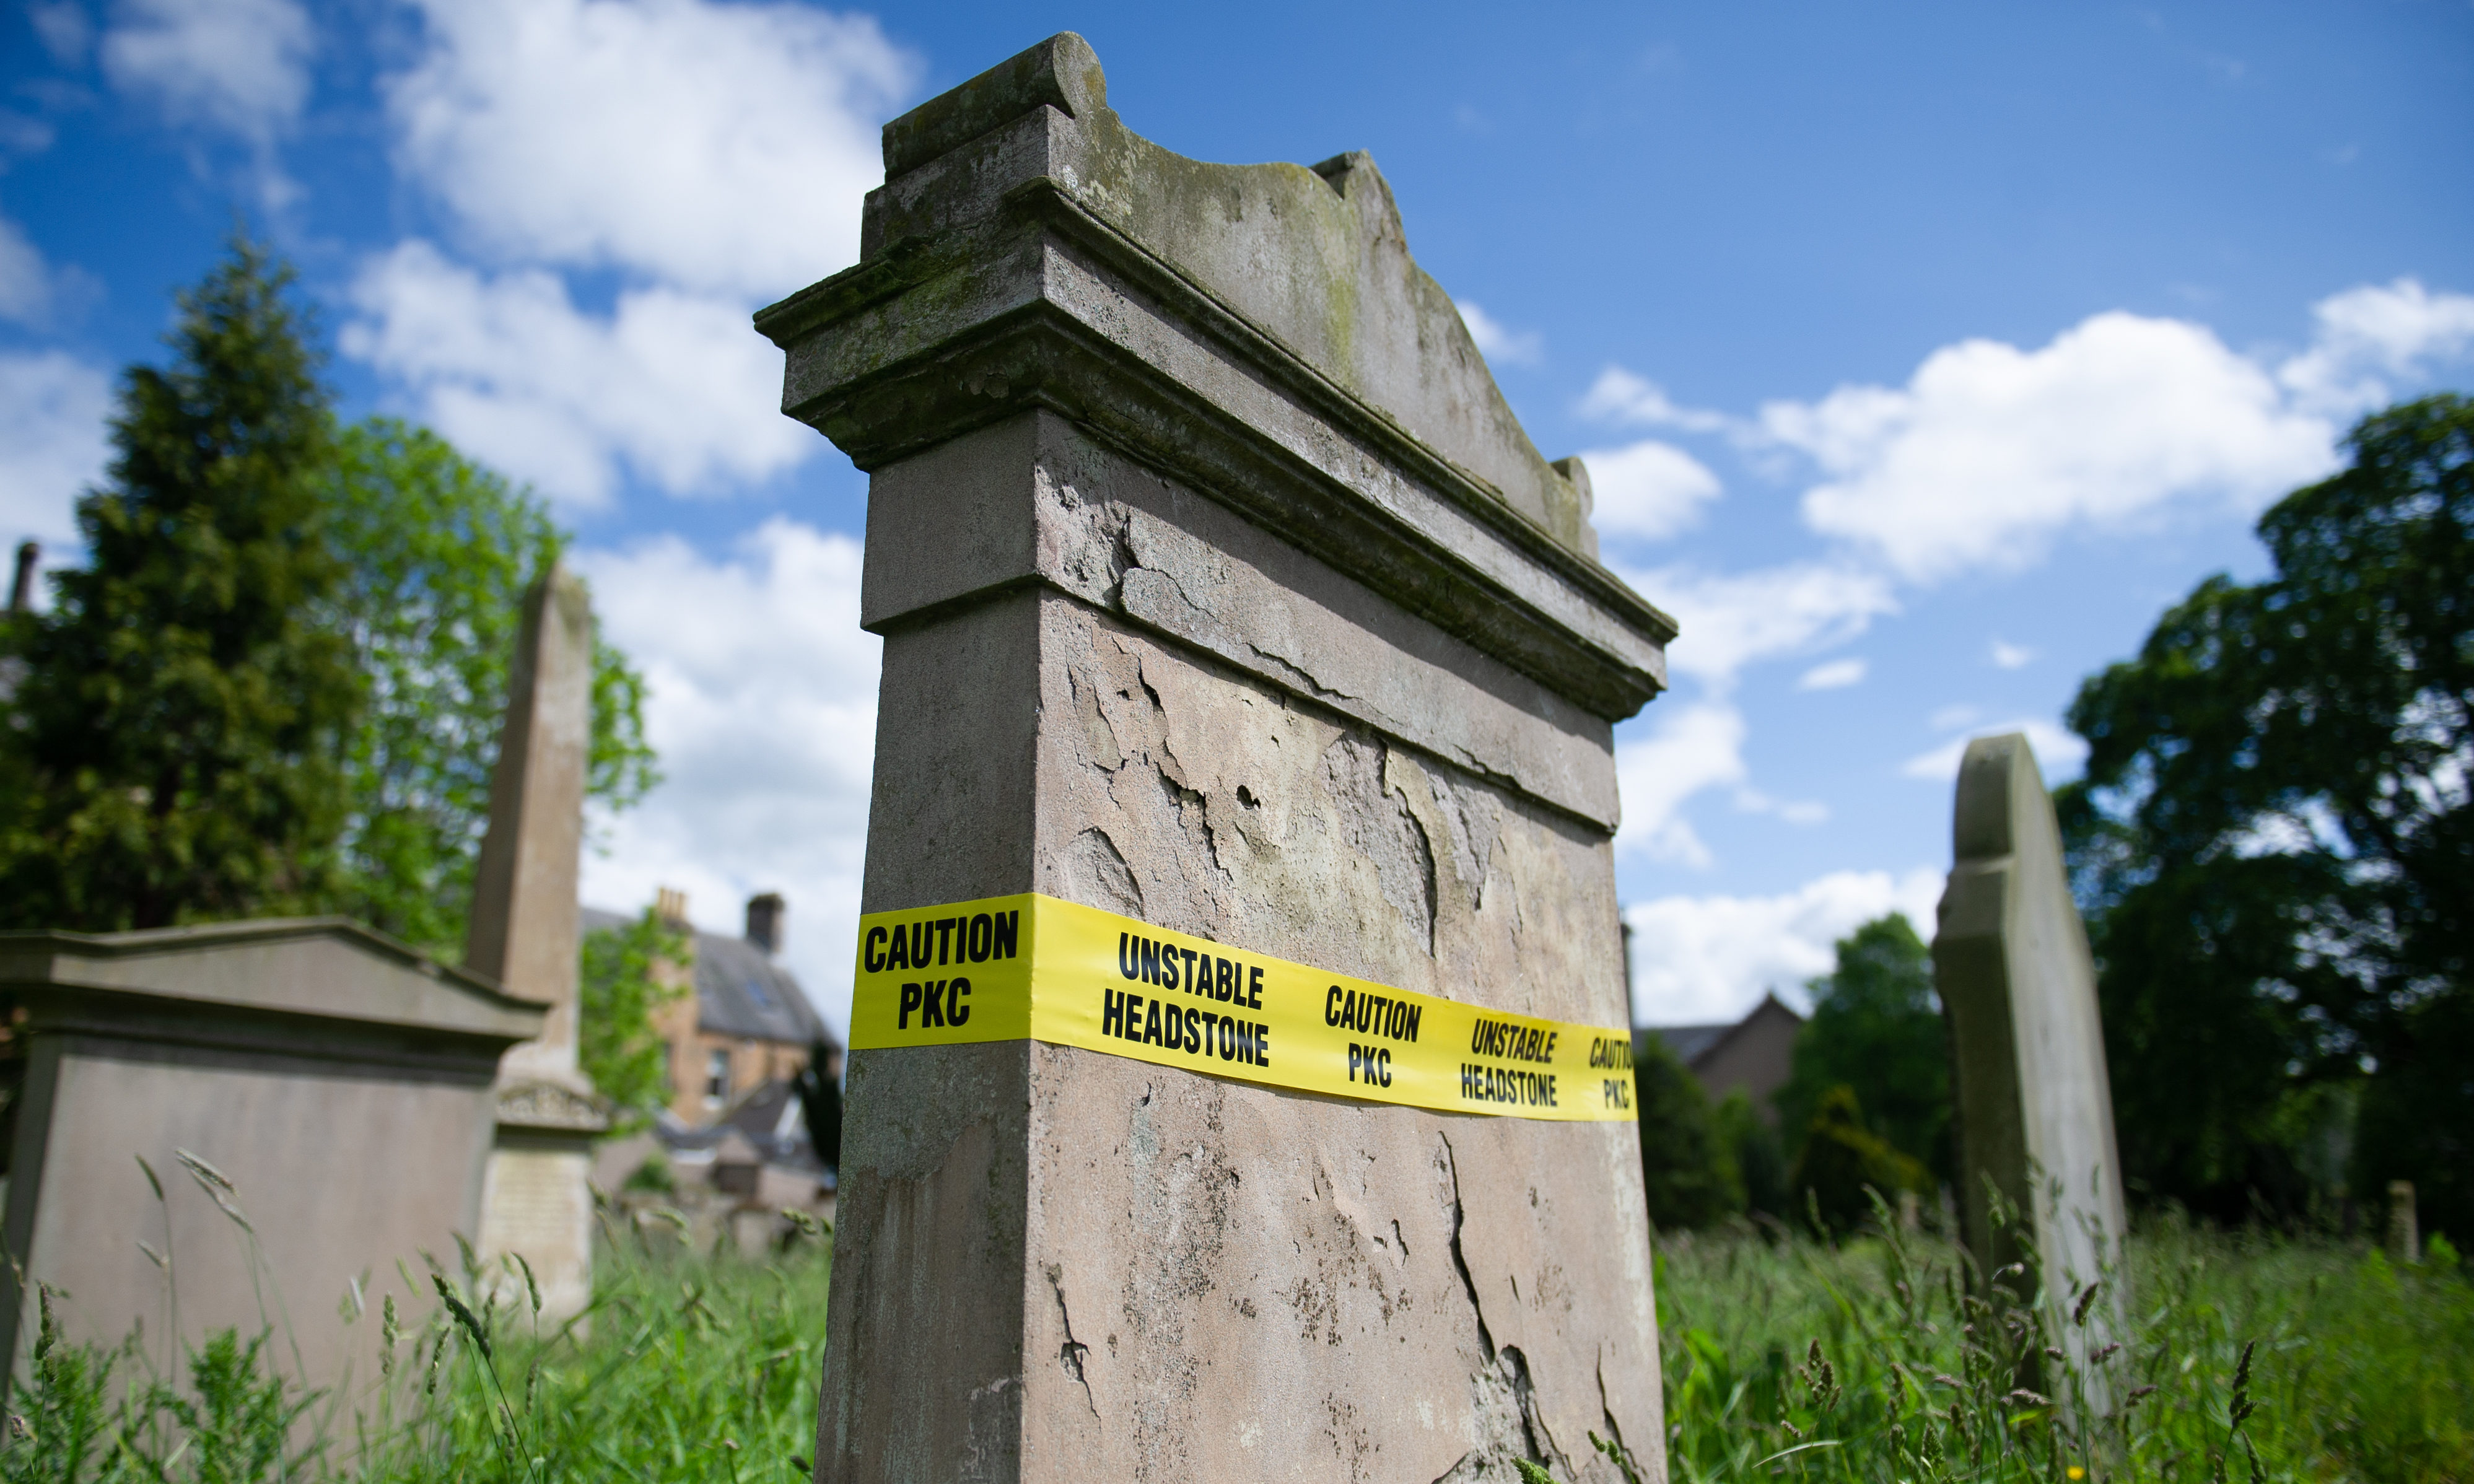 Tombstones in need of repair have been wrapped with safety tape at Greyfriars Burial Ground.